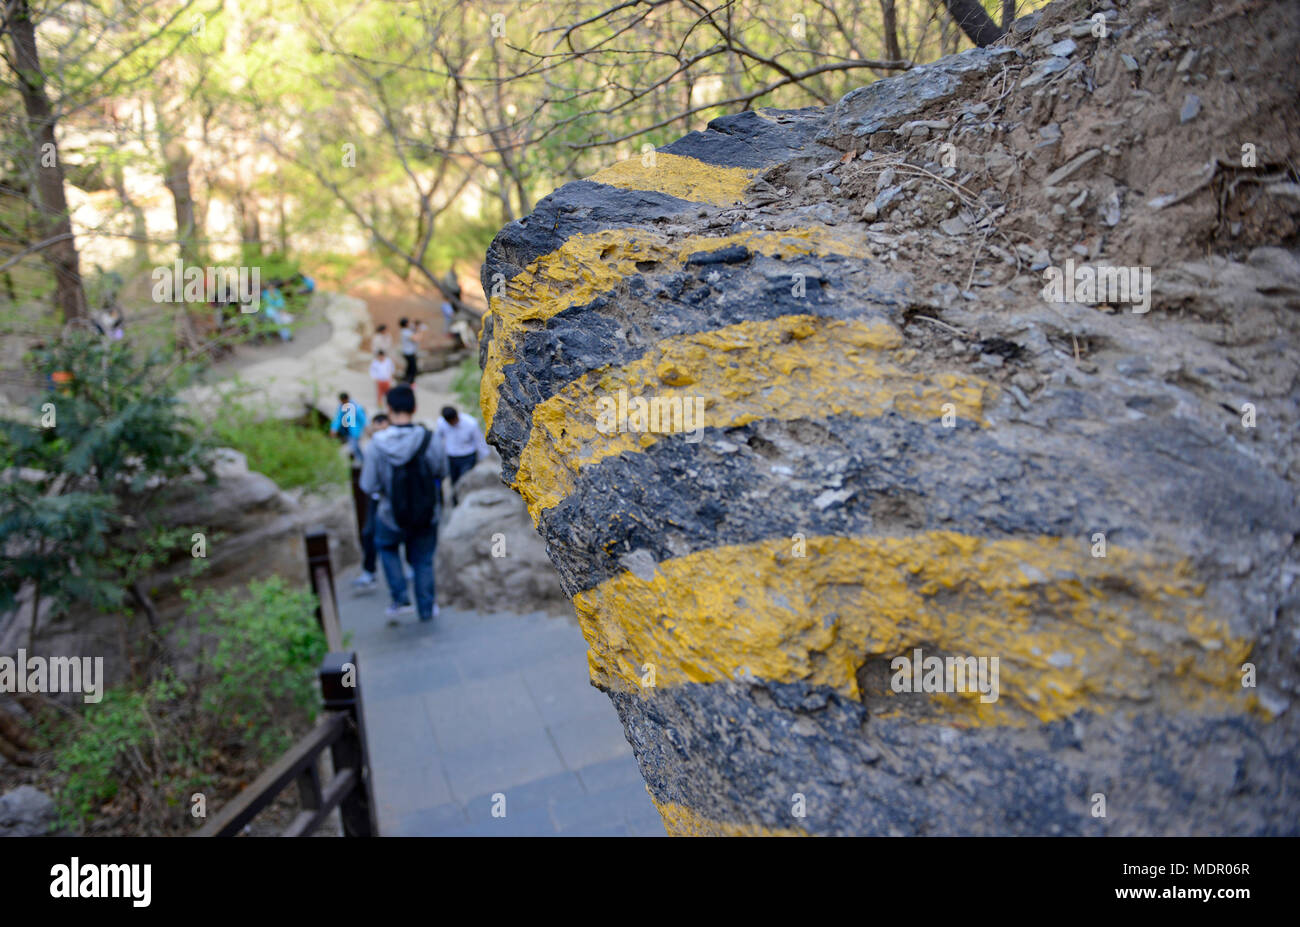 A protruding rock is painted with warning flashes to prevent people bumping their heads in the Swamp Cypress garden in Beijing Botanic Garden, China Stock Photo